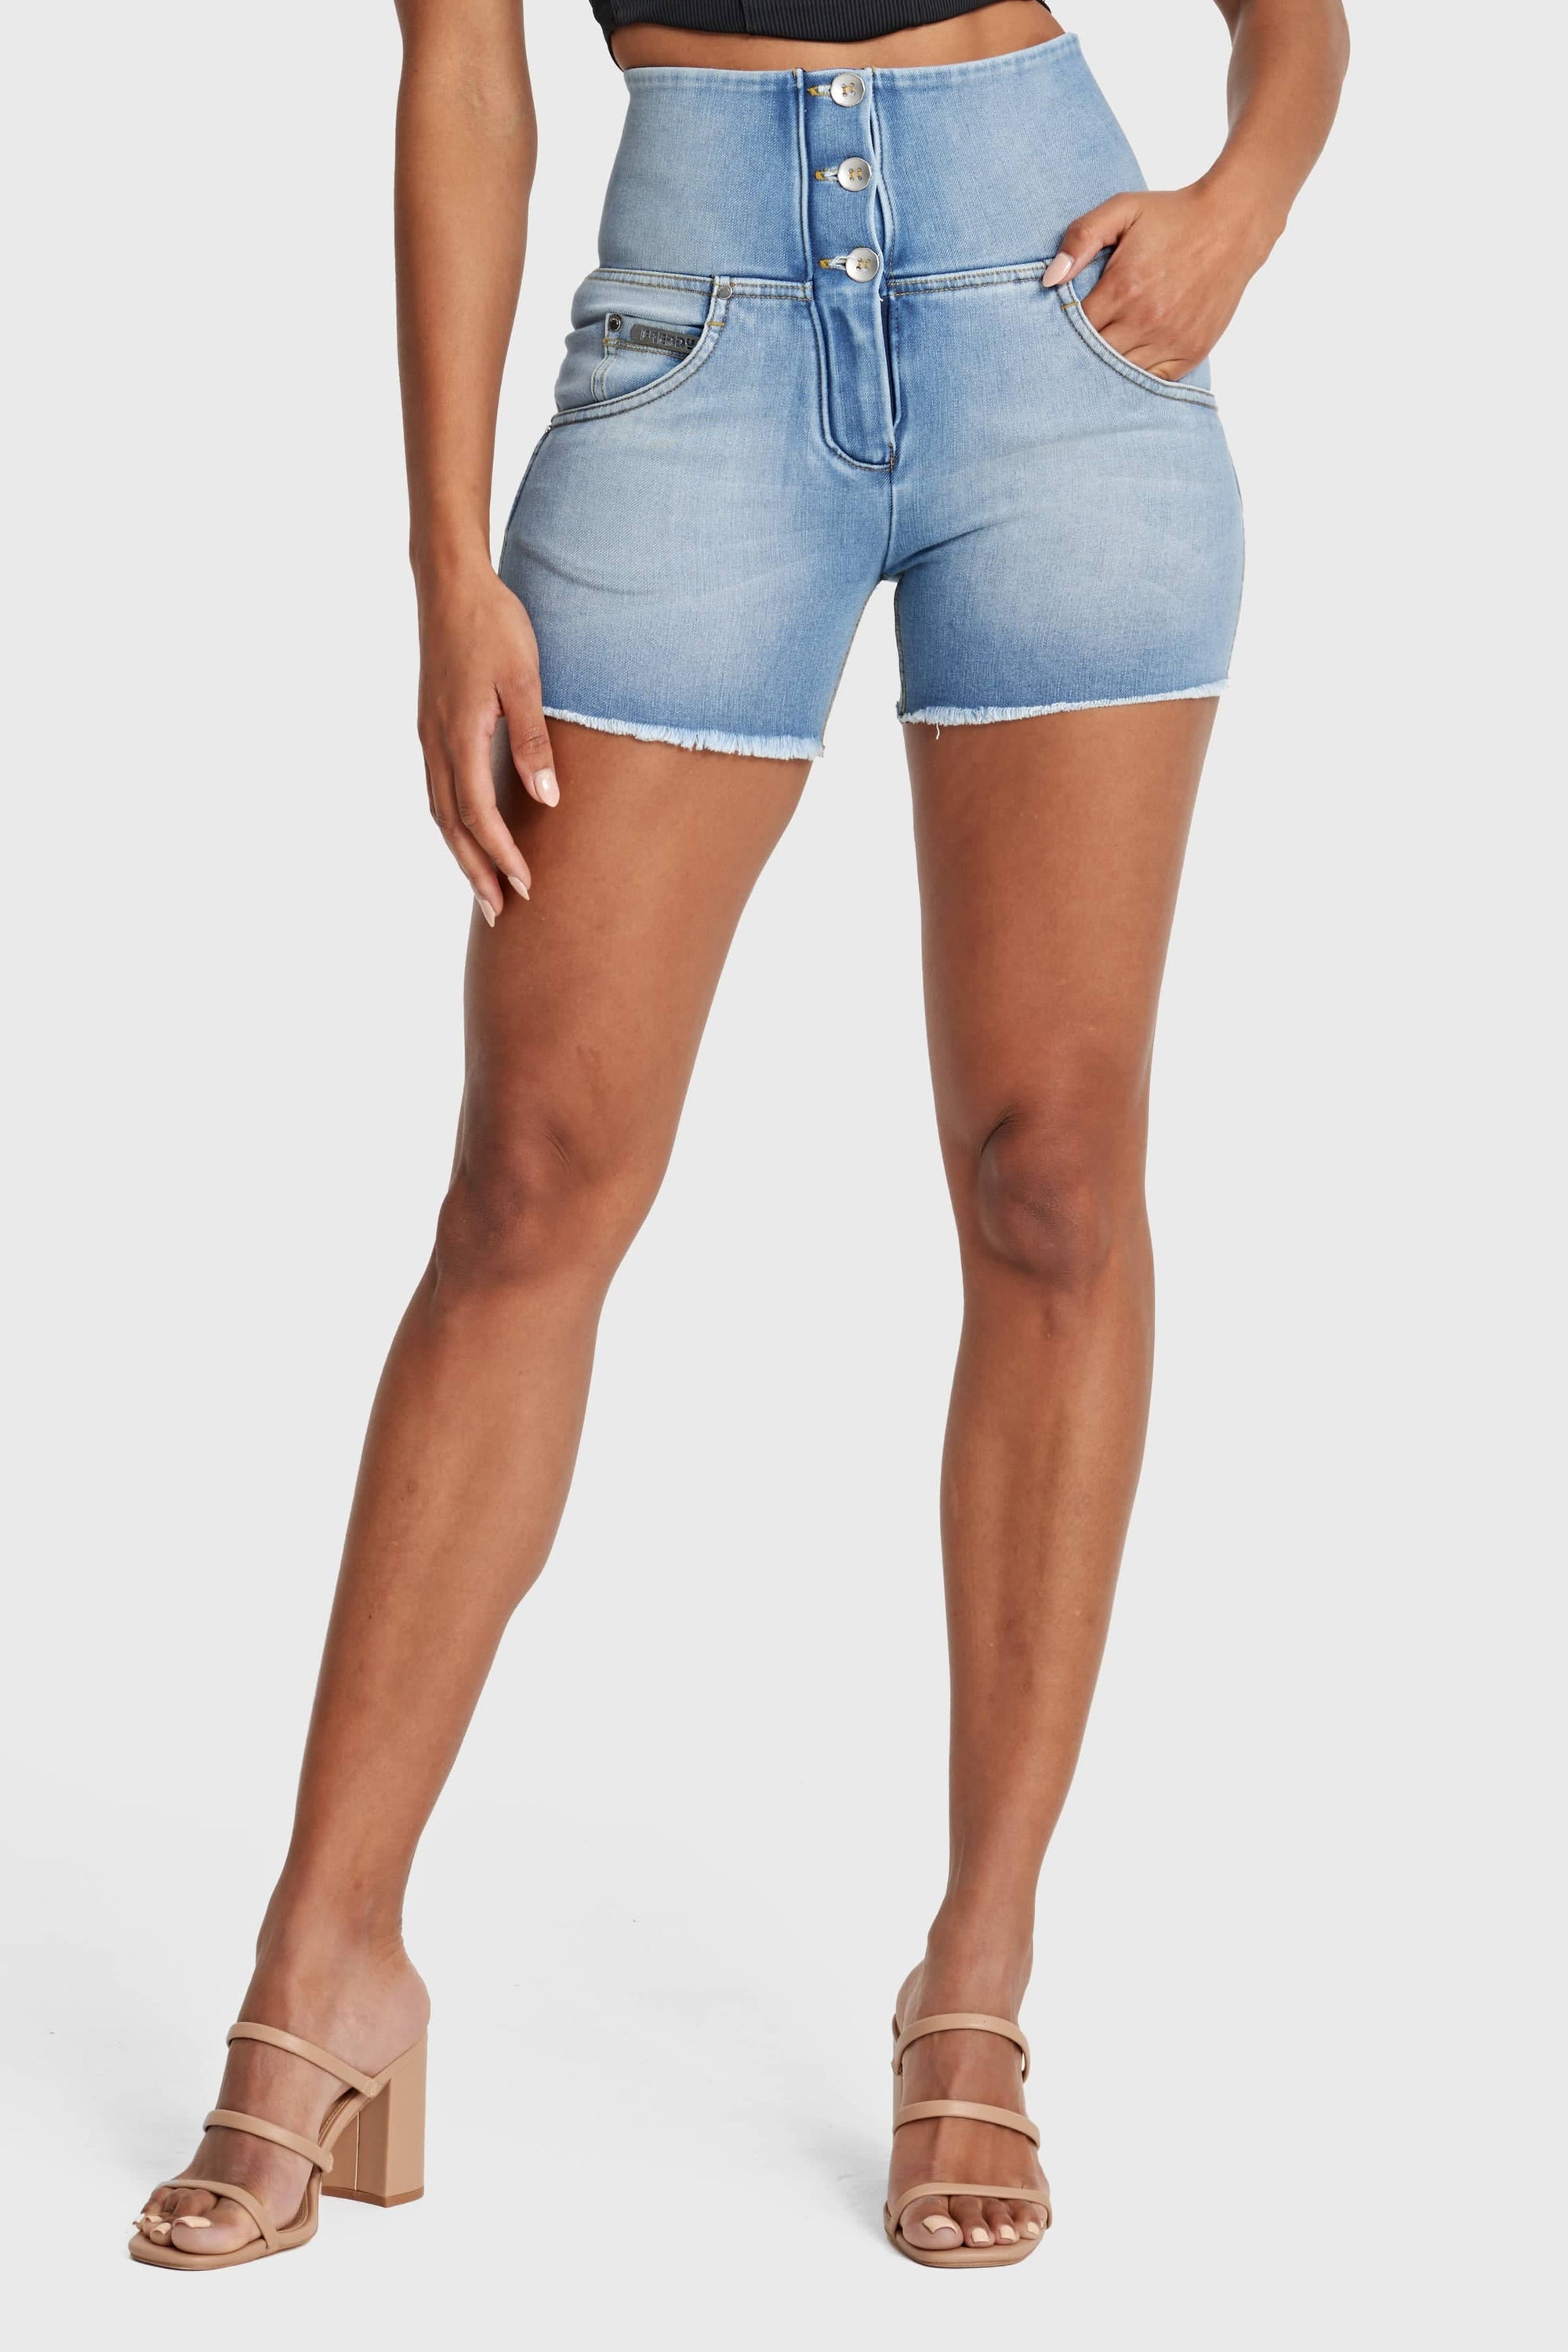 WR.UP® Snug Jeans - 3 Button High Waisted - Shorts - Light Blue + Yellow Stitching 3